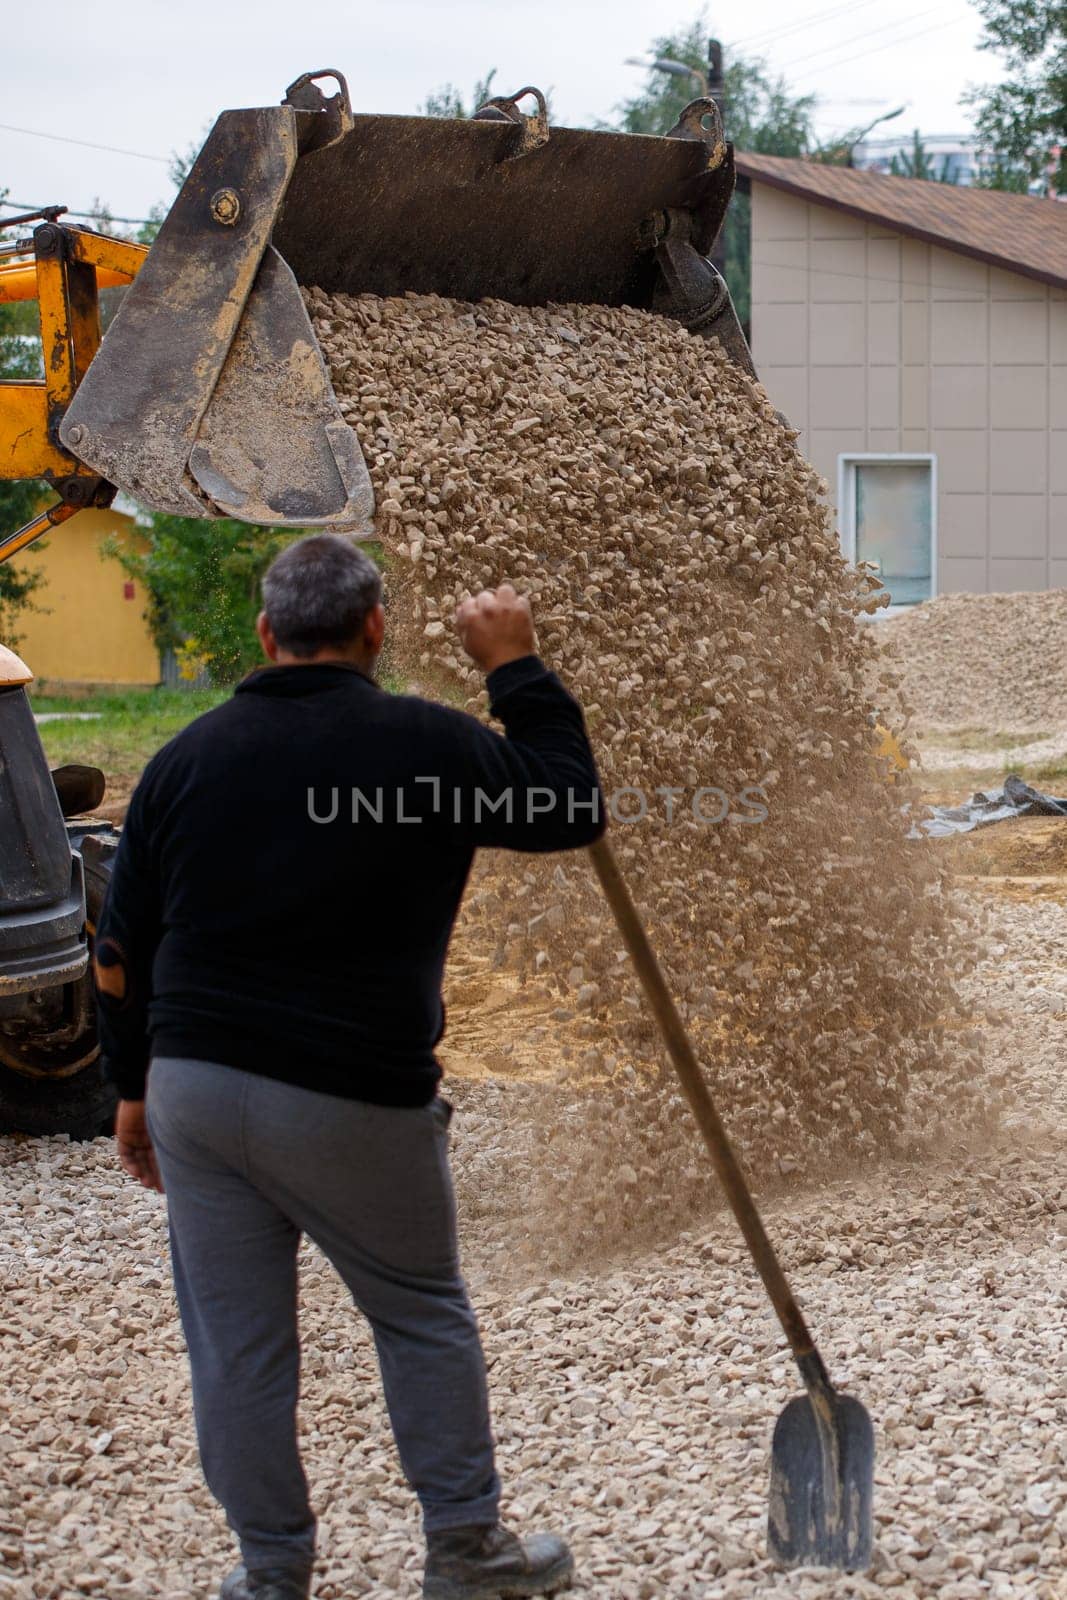 a bulldozer pours macadam from a bucket onto the ground at a construction site in front of gray-haired worker with shovel.